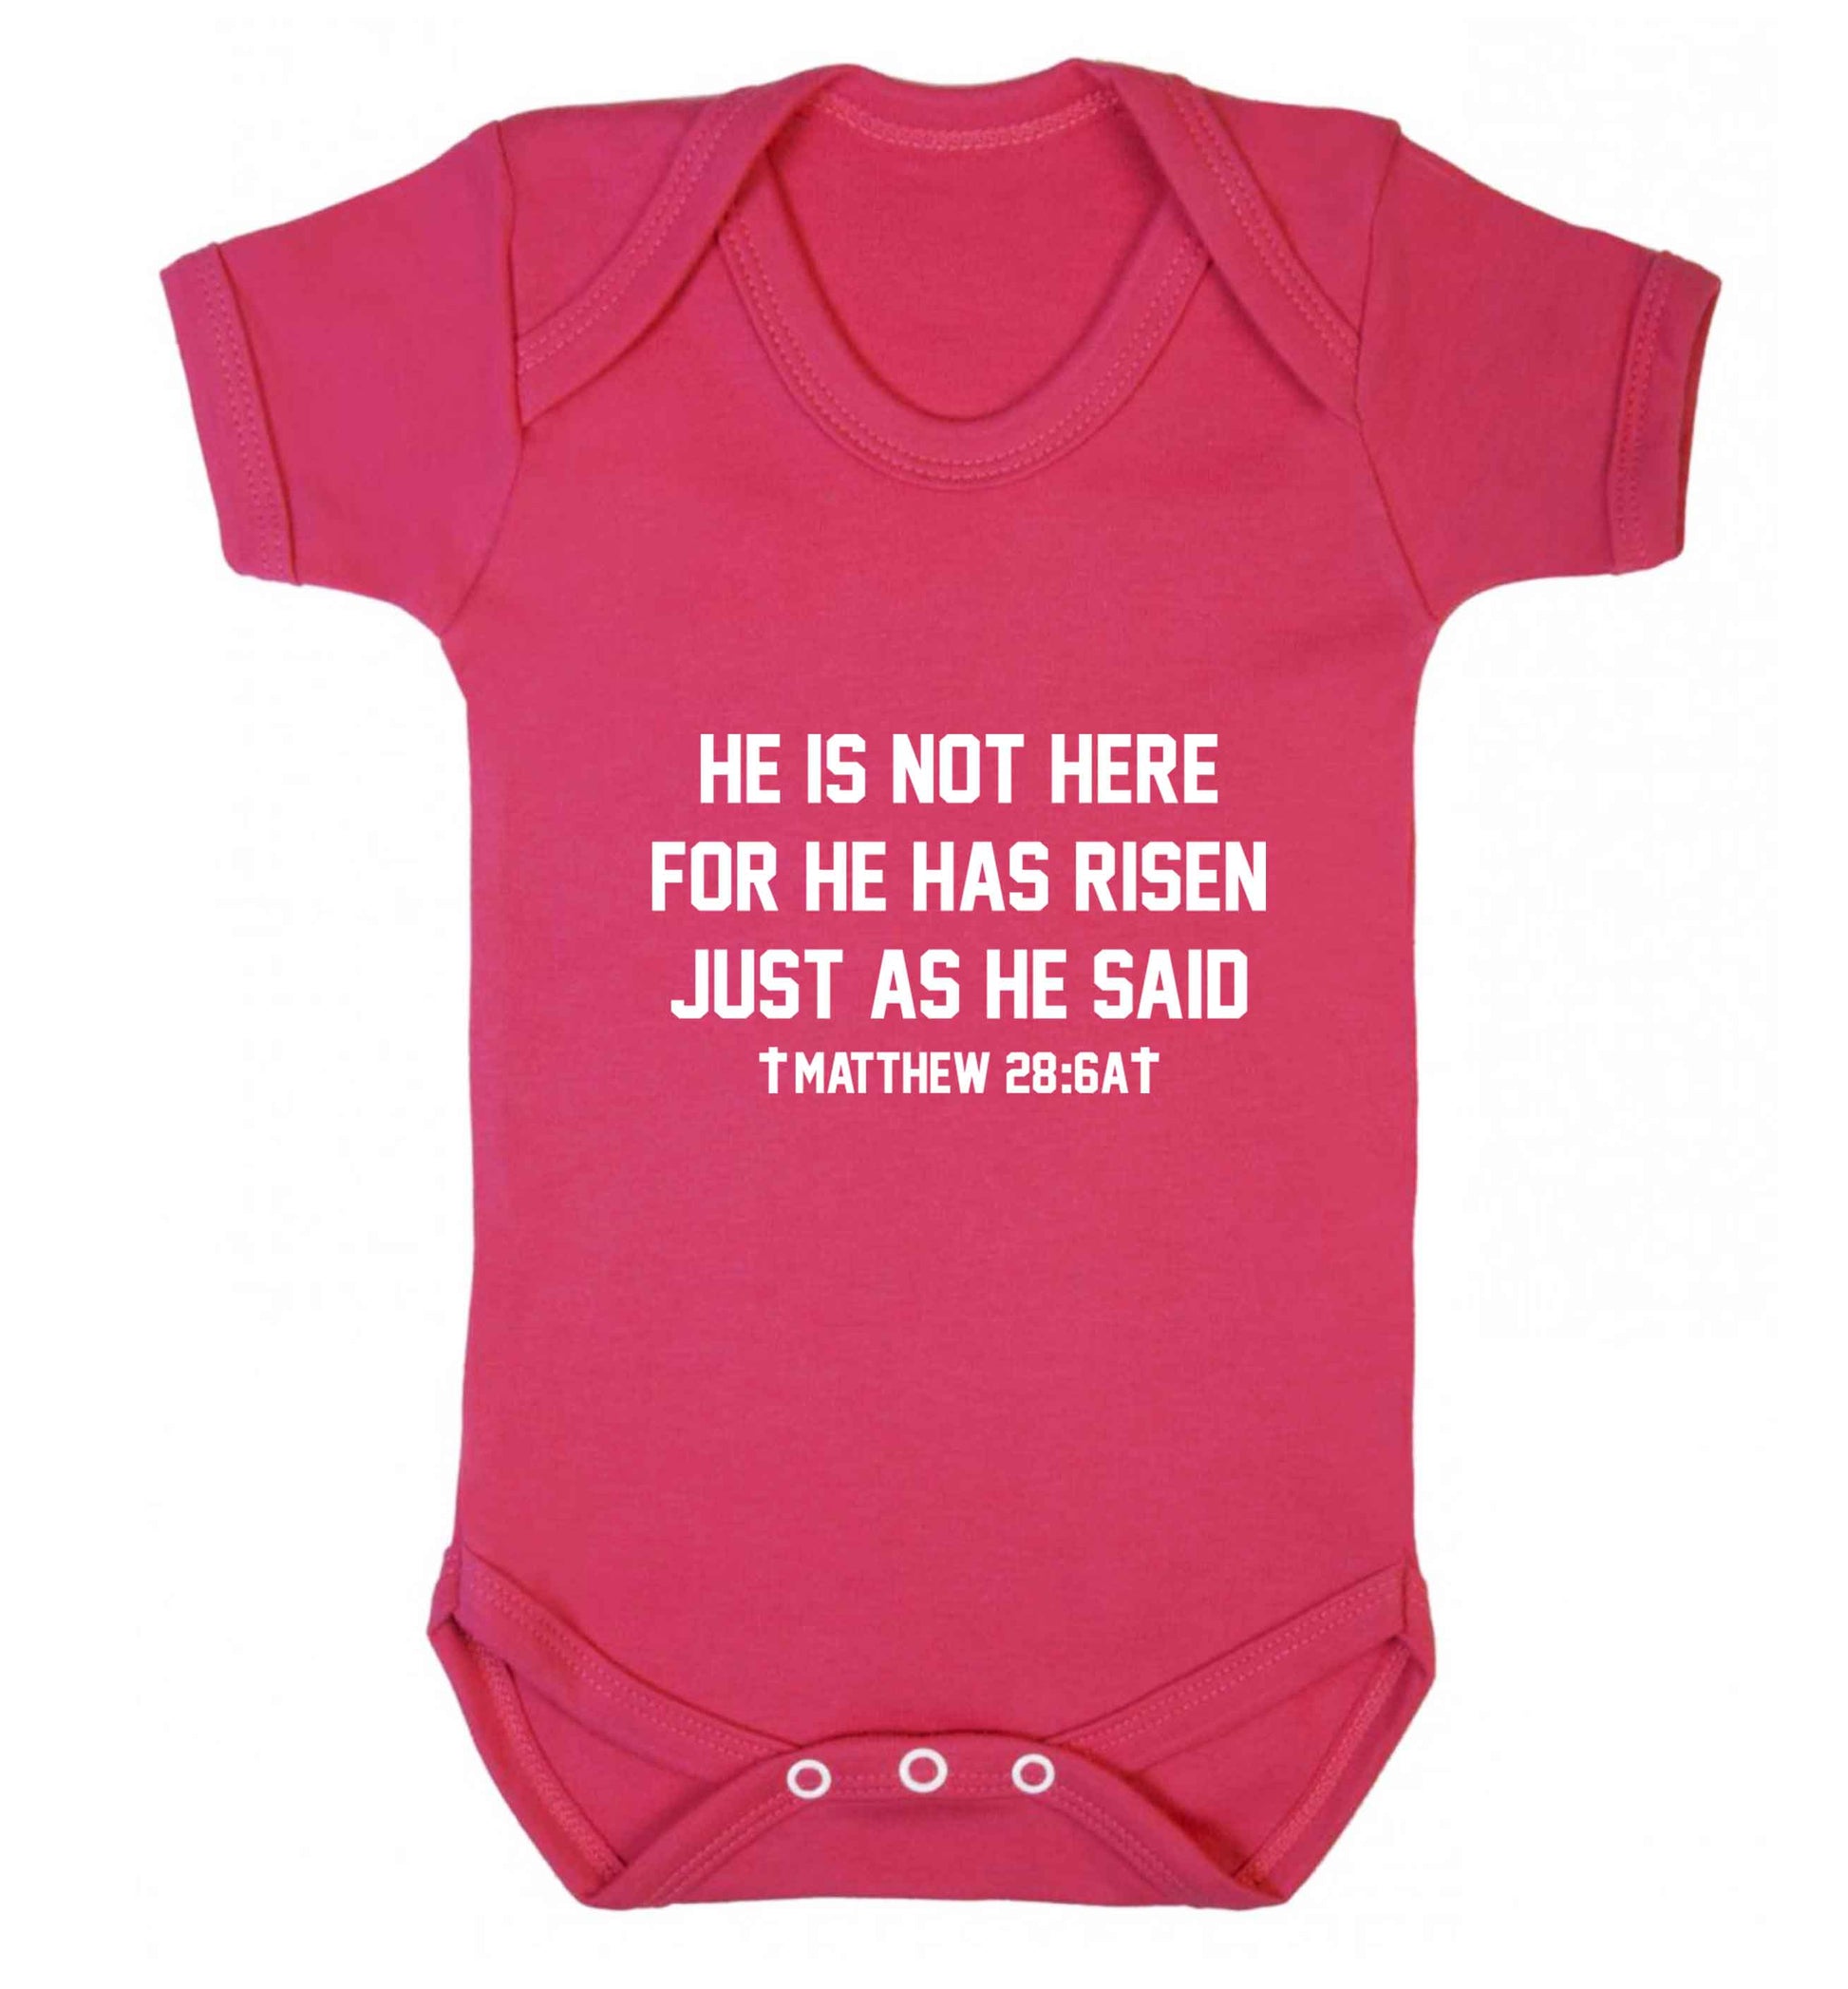 He is not here for he has risen just as he said matthew 28:6A baby vest dark pink 18-24 months